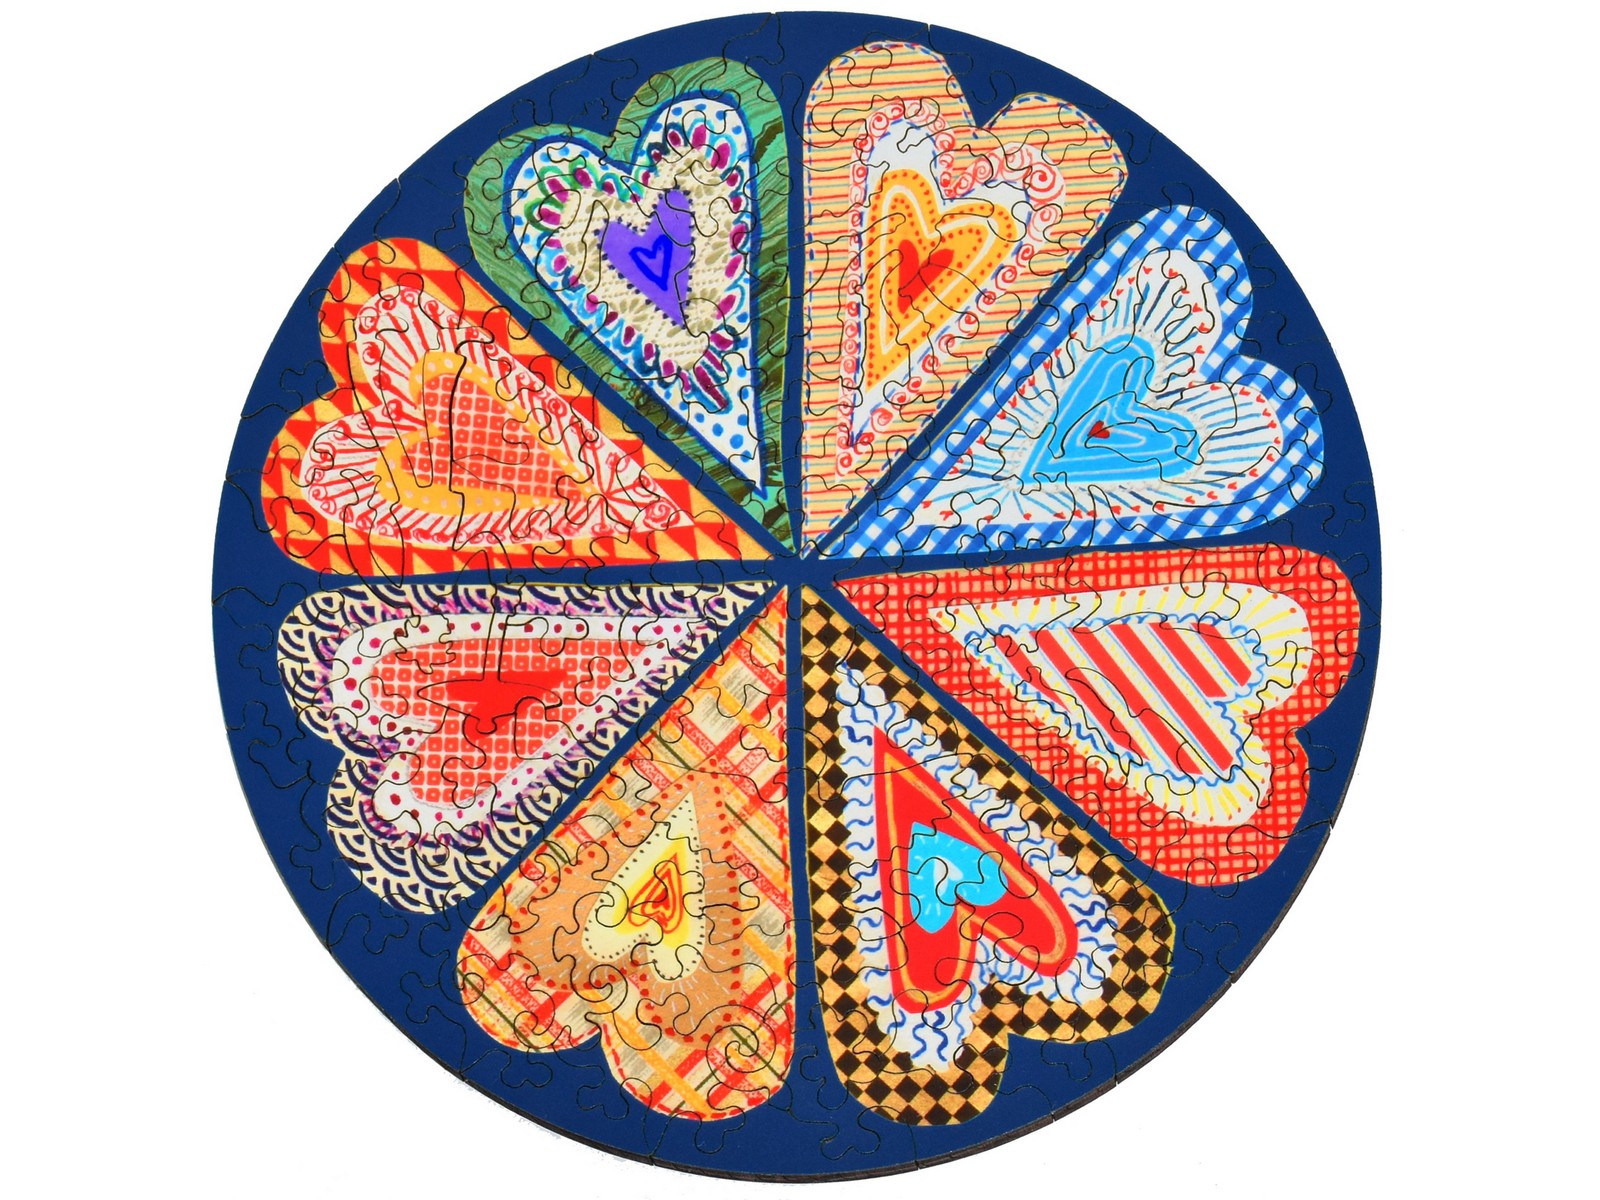 The front of the puzzle, Paper Hearts, which shows eight colorful patterned hearts.